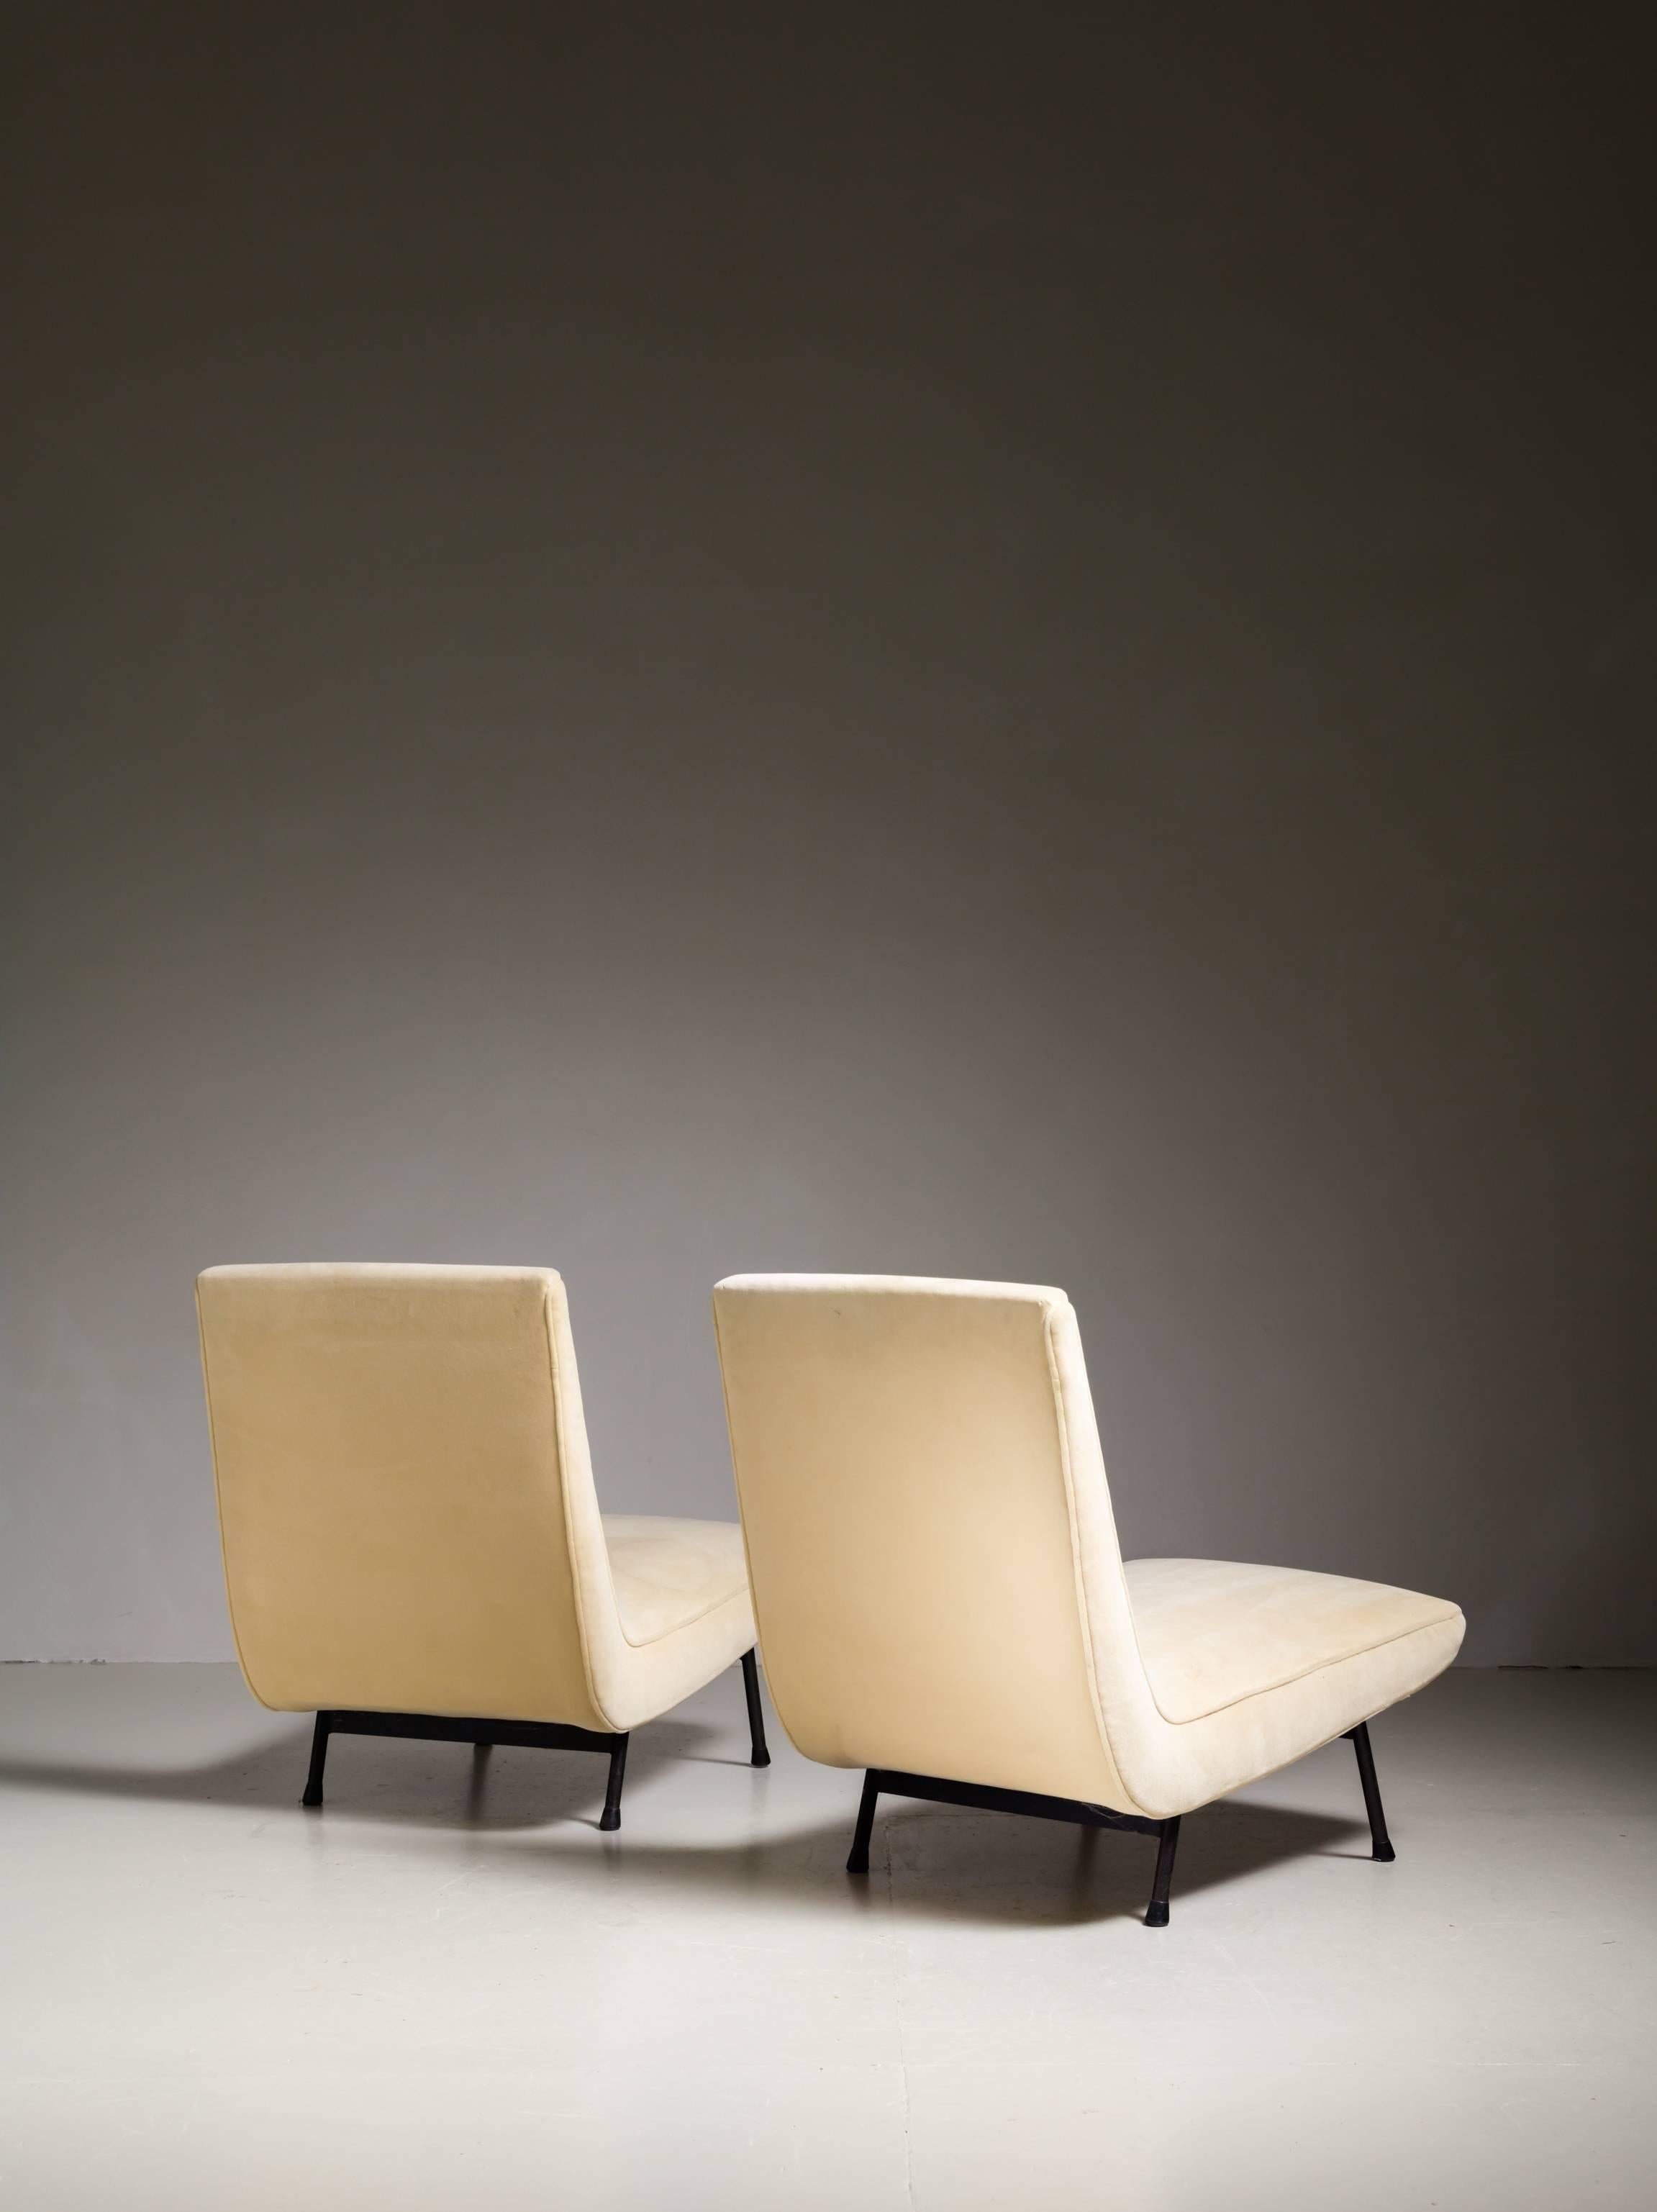 French Pair of Cream White Slipper Chairs, France, 1950s For Sale